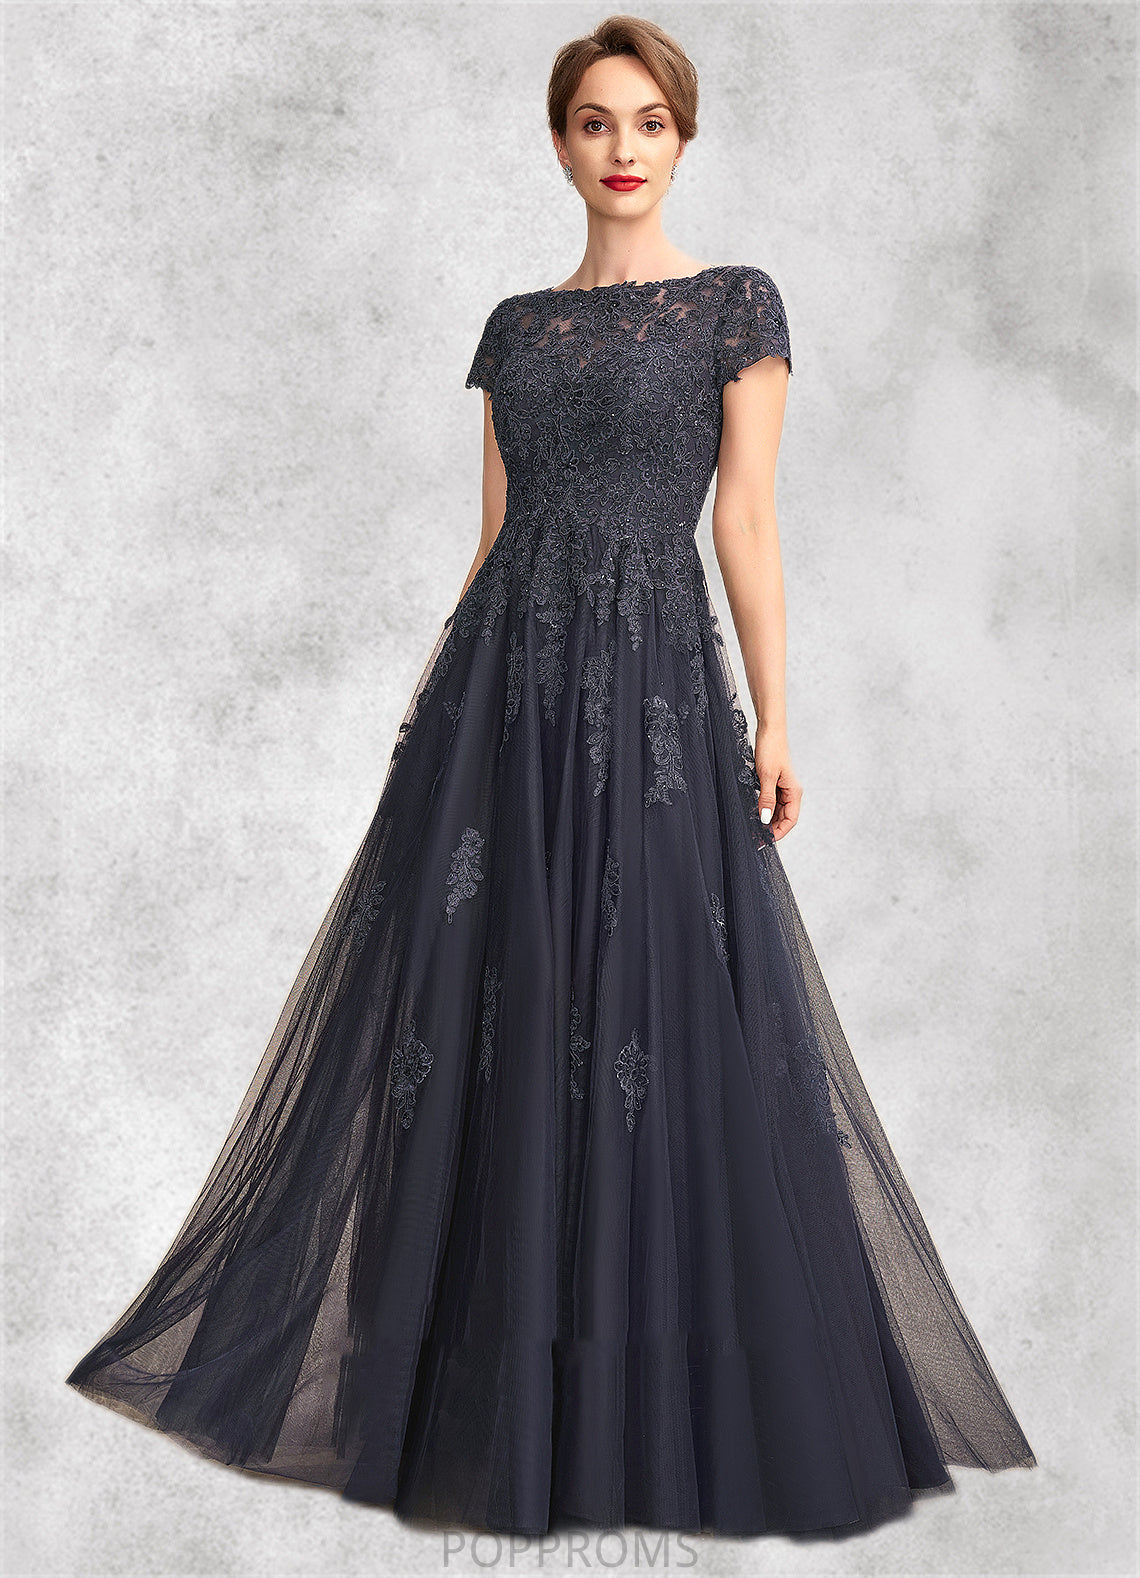 Olive A-Line Scoop Neck Floor-Length Tulle Lace Mother of the Bride Dress With Beading PP6126P0015029